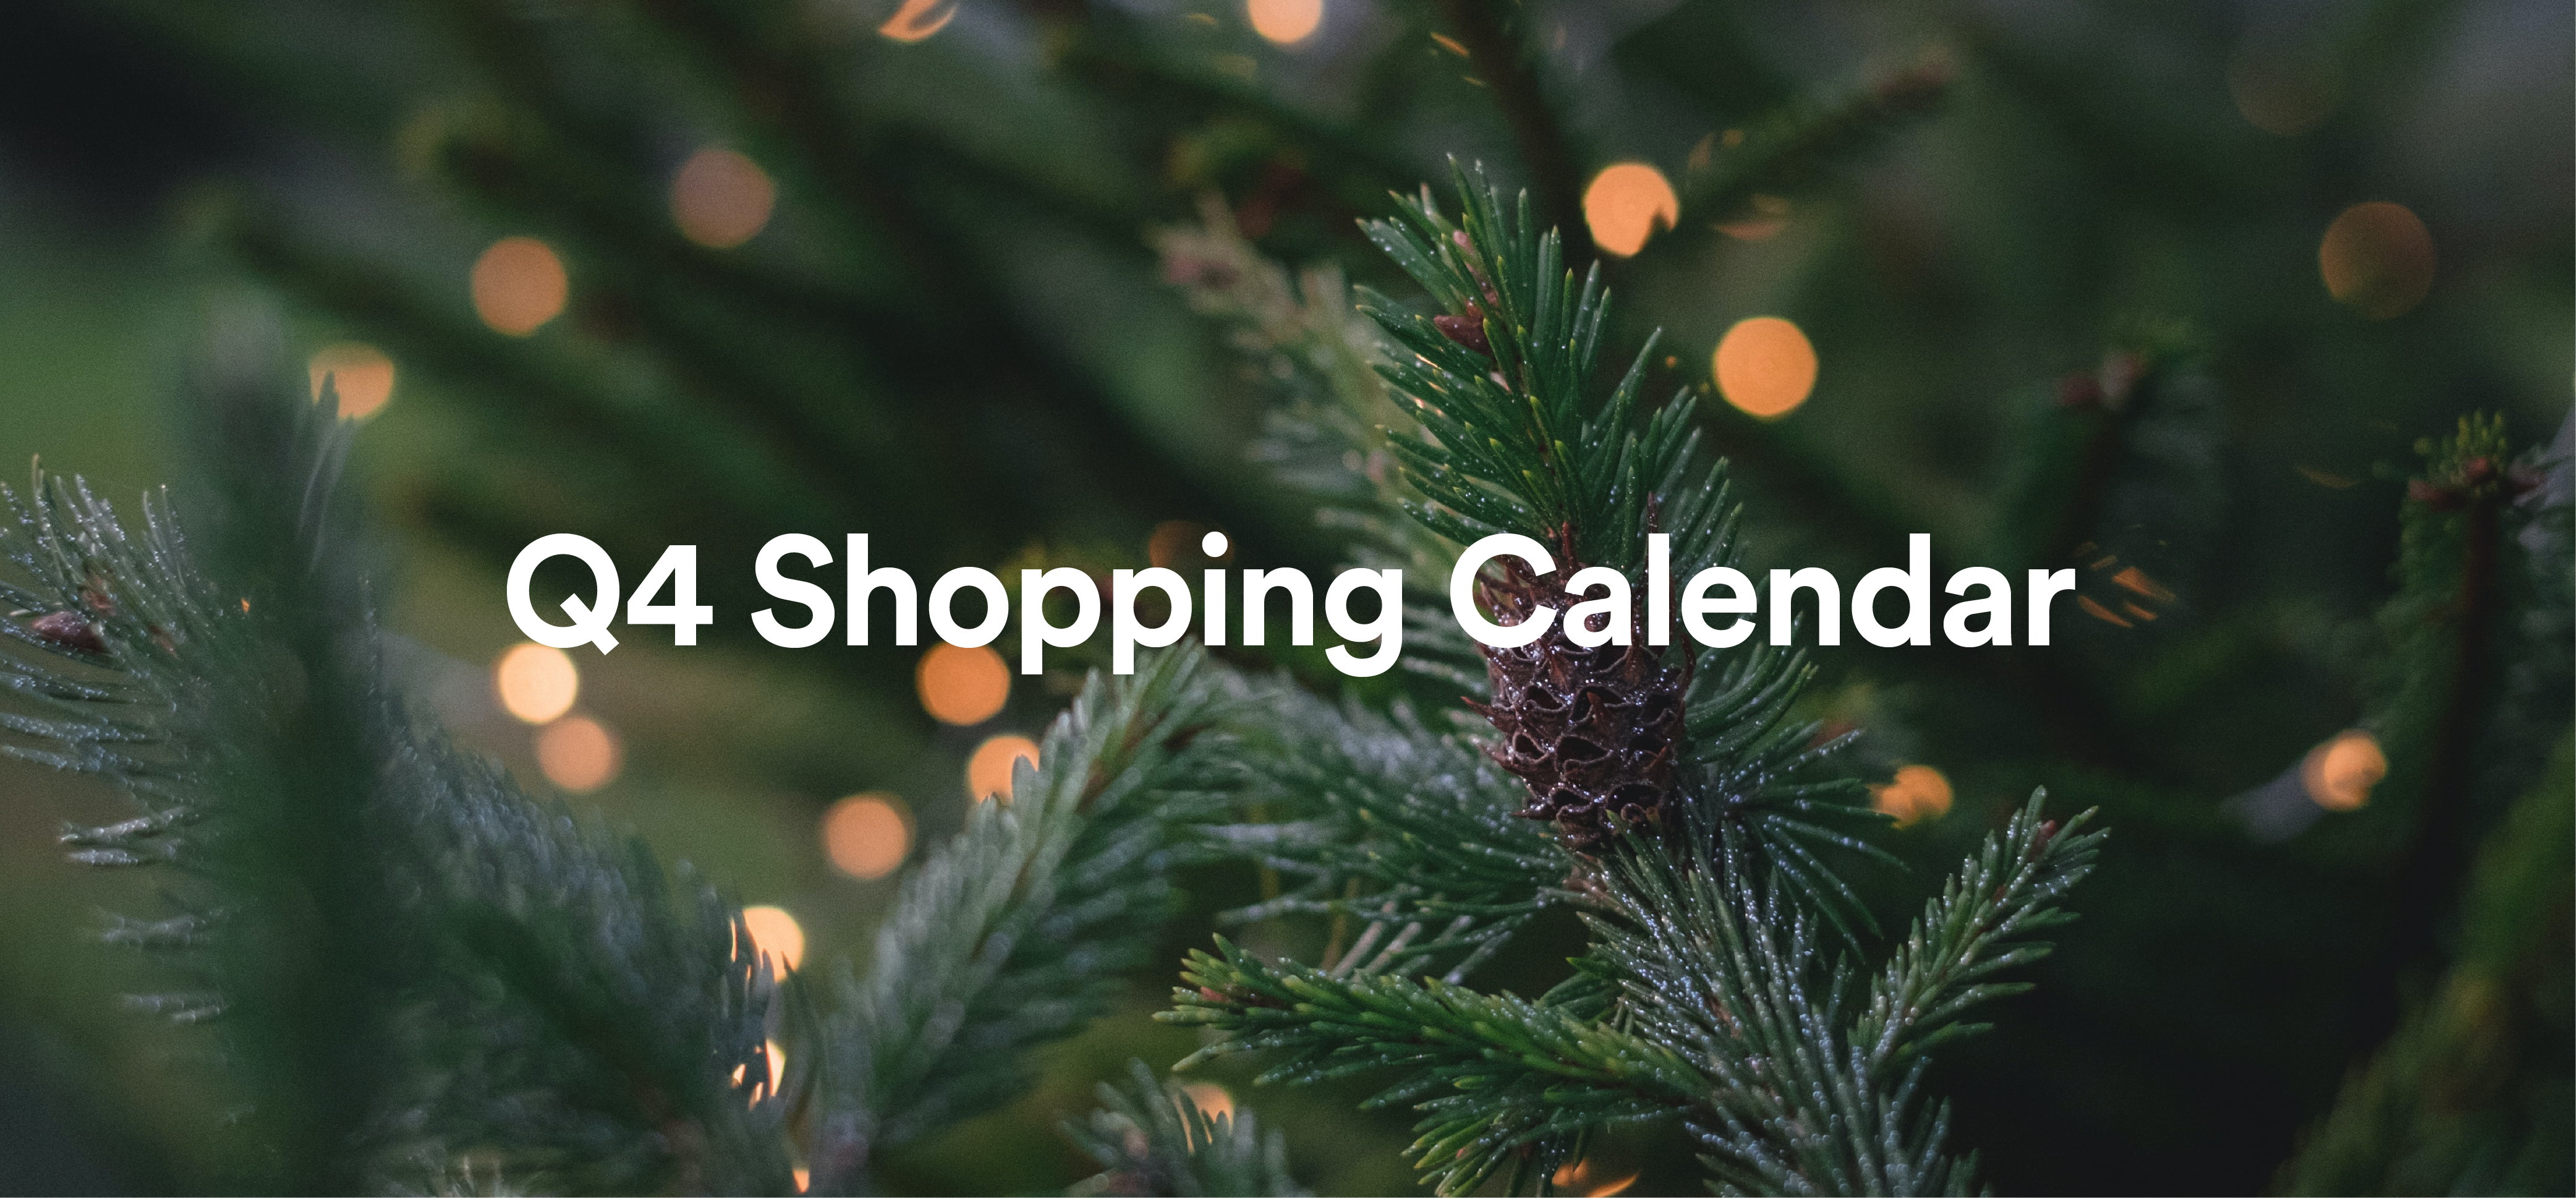 Gearing Up for the Holidays? Our Q4 Shopping Calendar Can Help